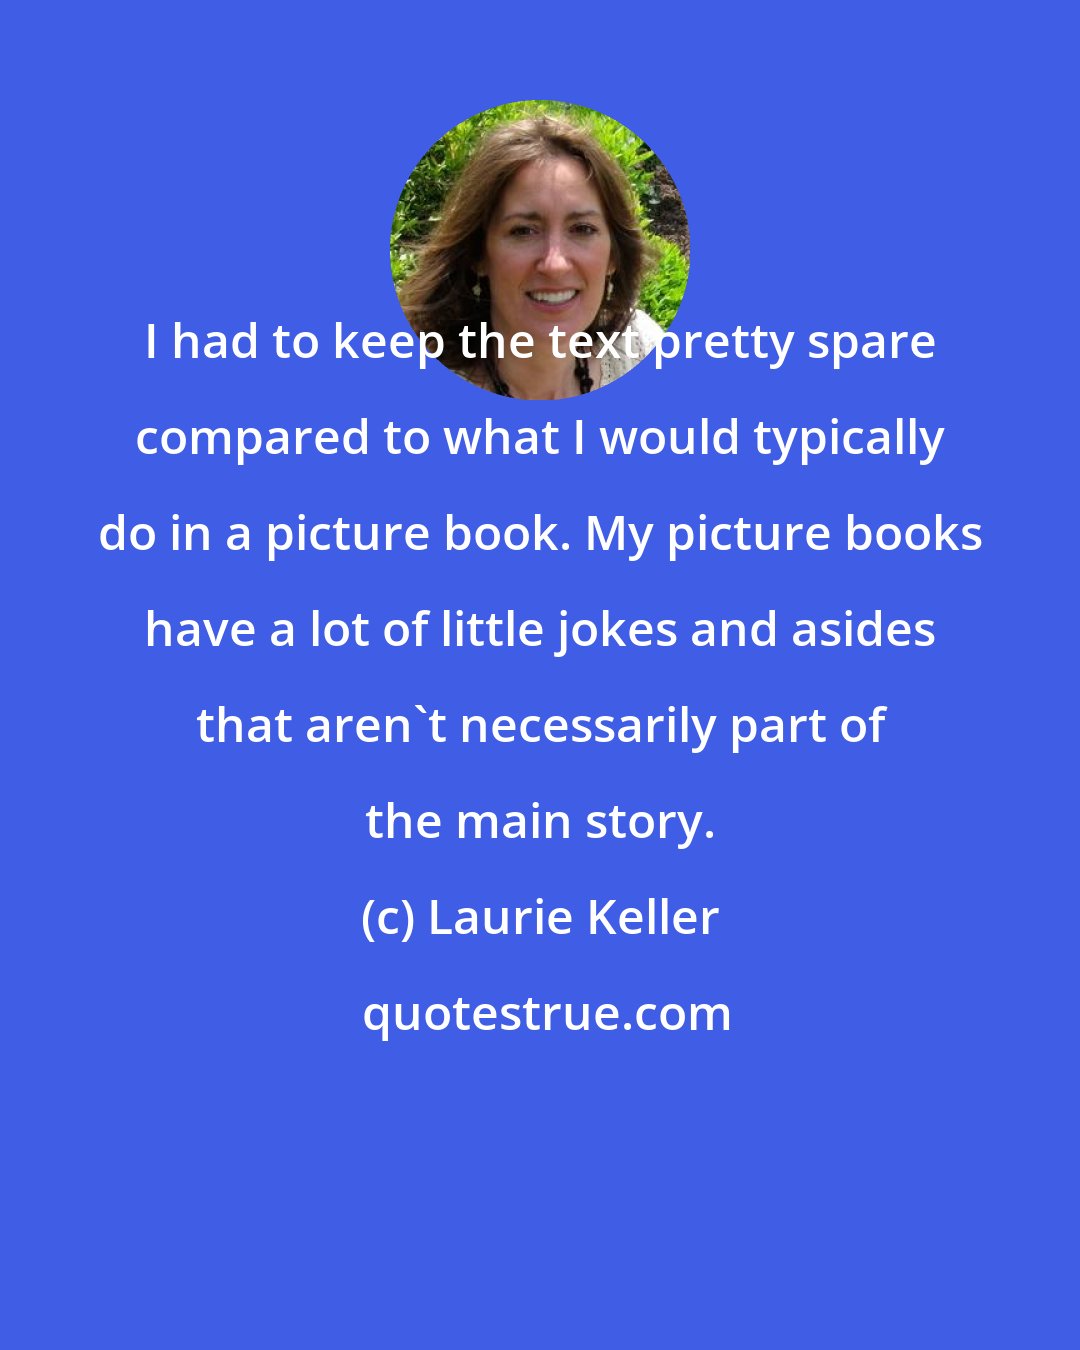 Laurie Keller: I had to keep the text pretty spare compared to what I would typically do in a picture book. My picture books have a lot of little jokes and asides that aren't necessarily part of the main story.